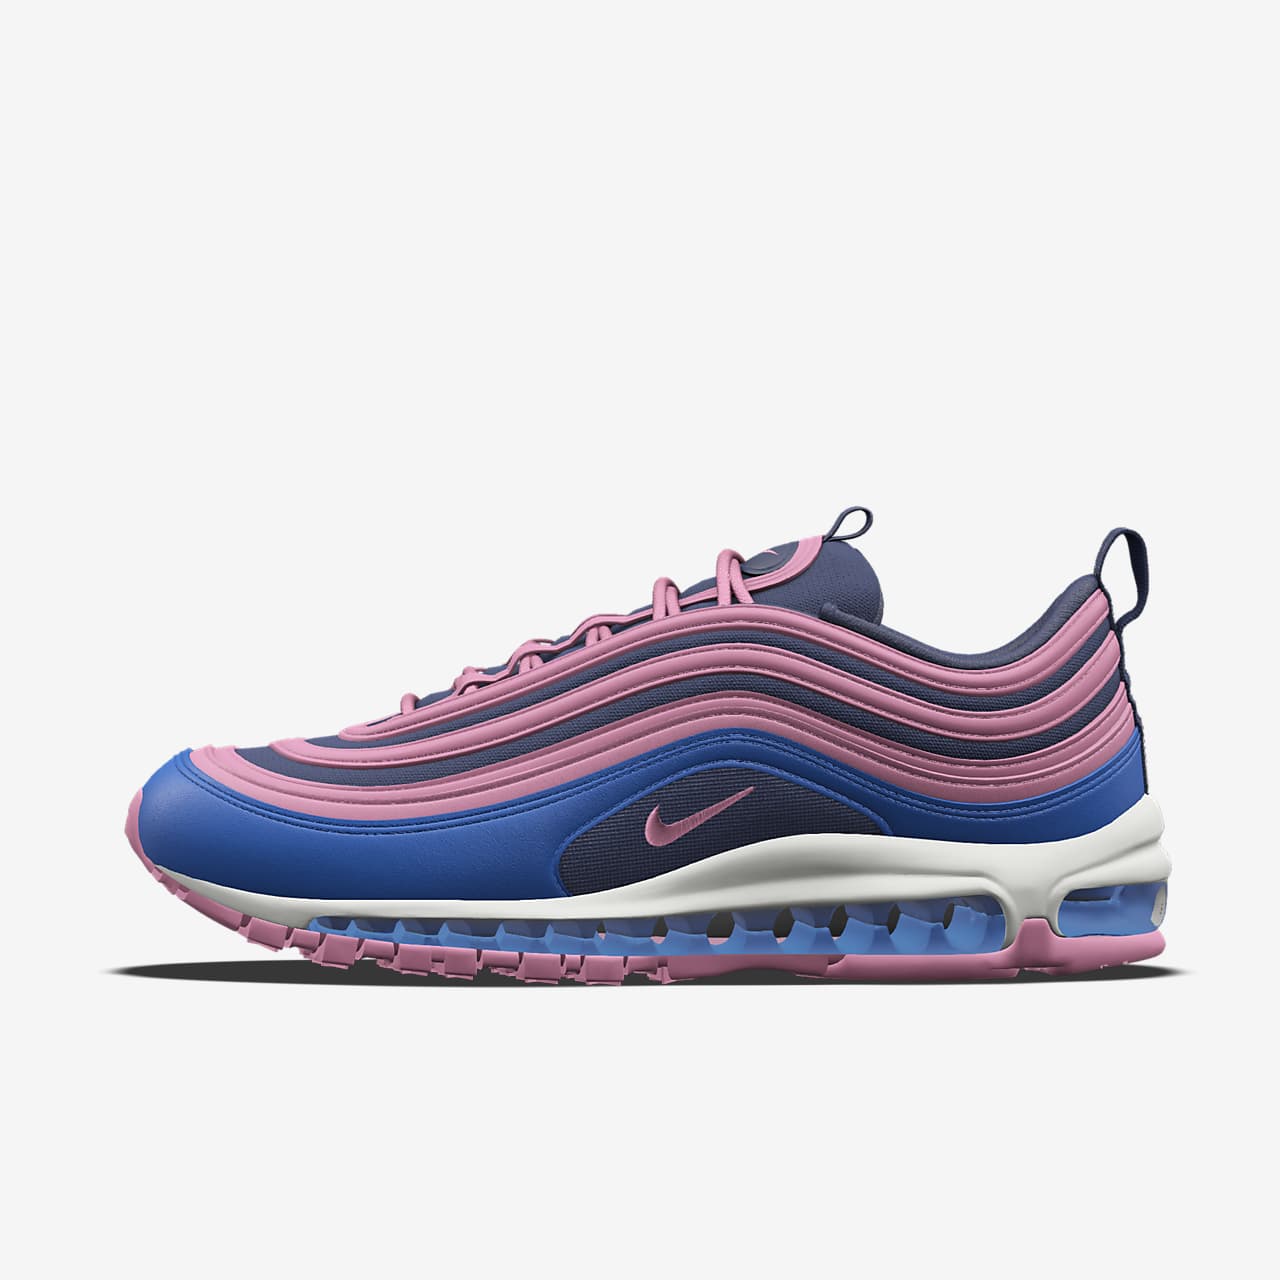 Sapatilhas personalizáveis Nike Air Max 97 By You para mulher